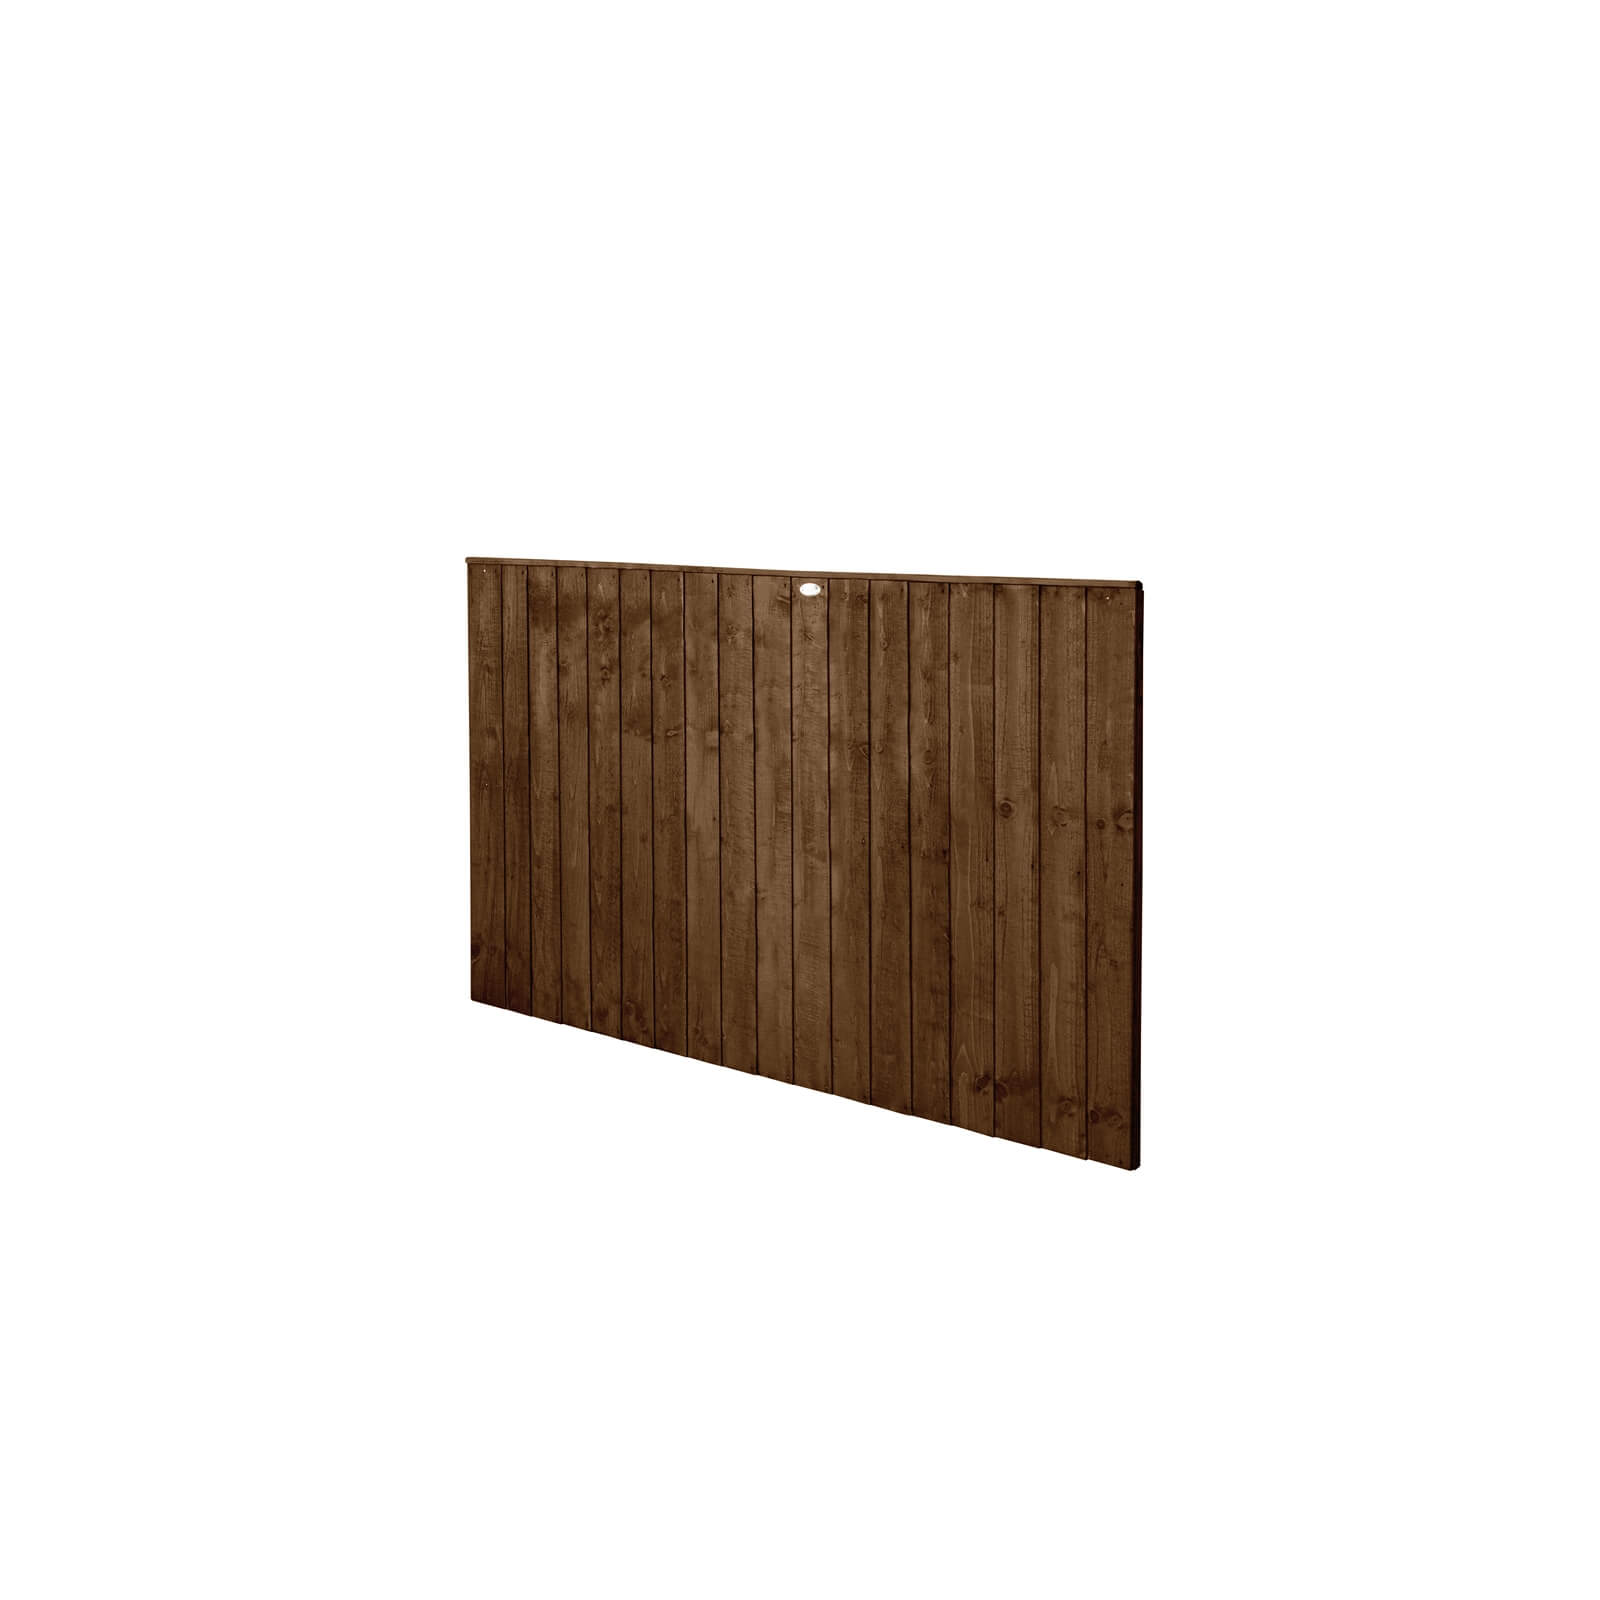 6ft x 4ft (1.83m x 1.23m) Pressure Treated Featheredge Fence Panel (Dark Brown) - Pack of 20